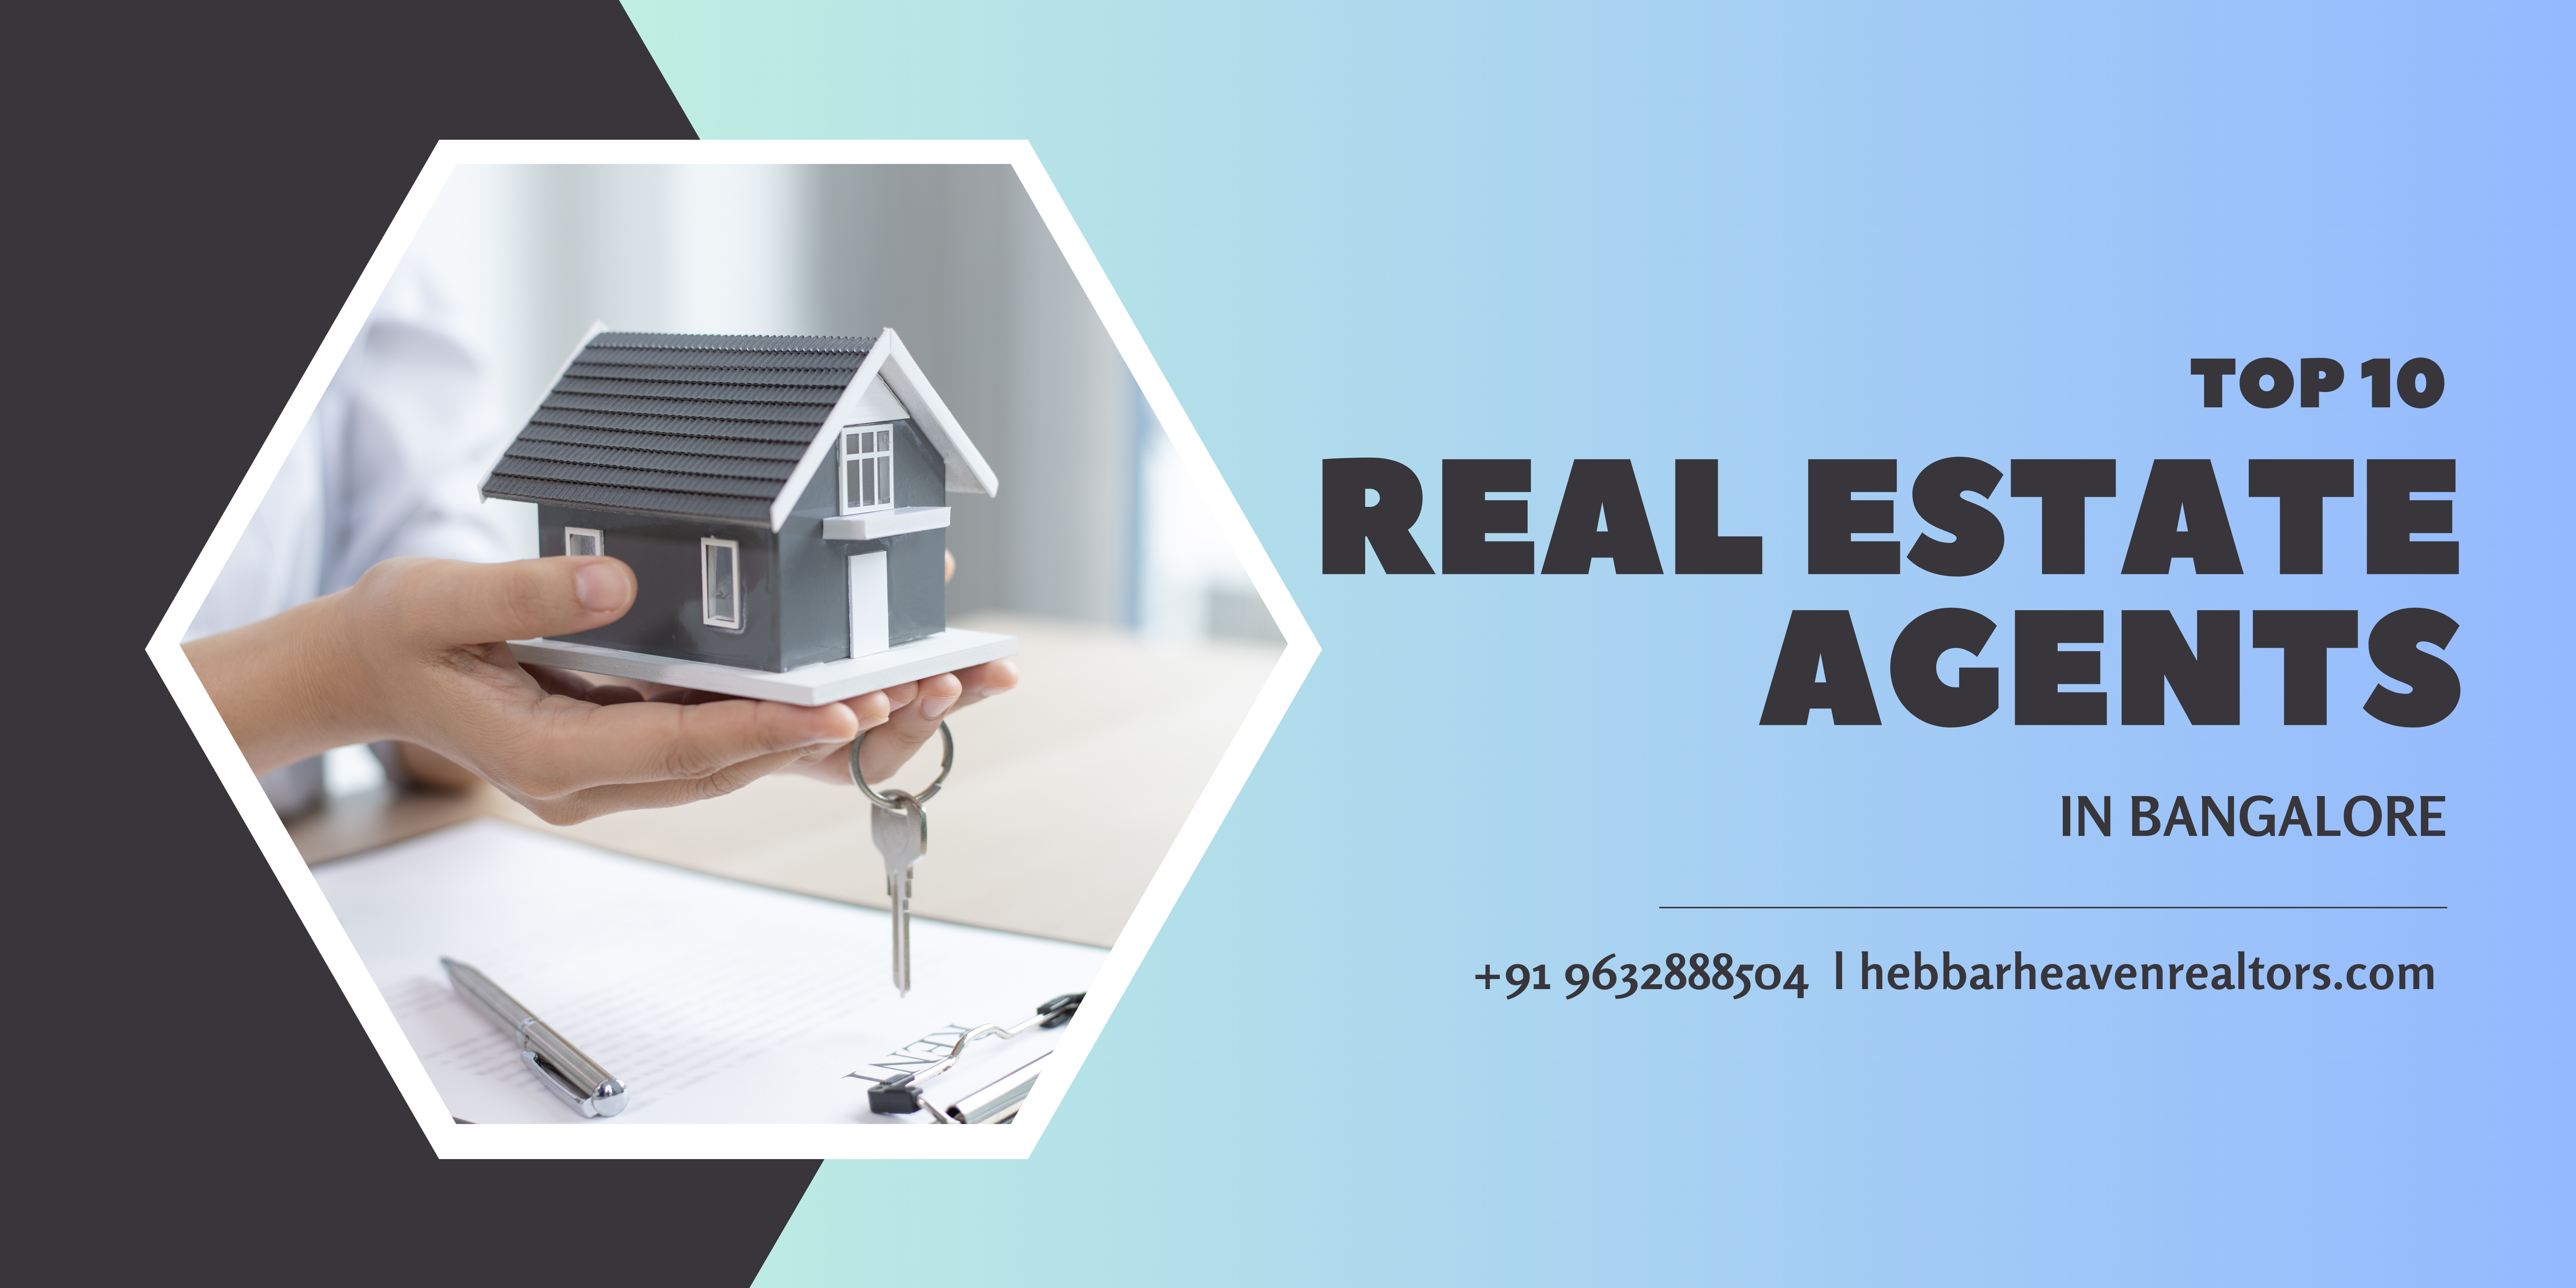 Top 10 Real Estate Agents in Bangalore